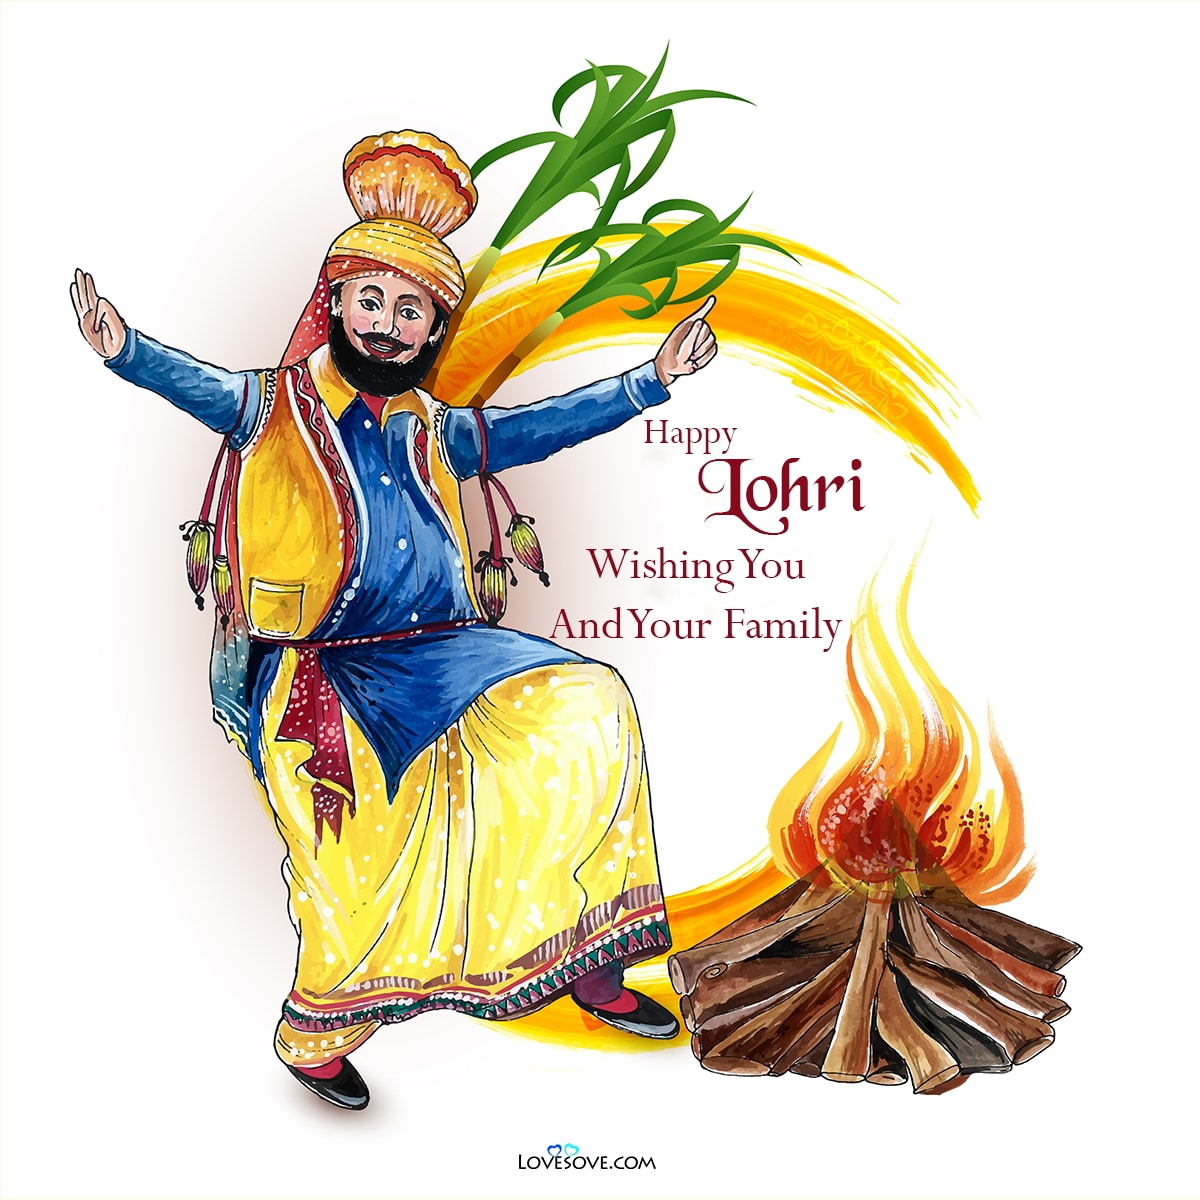 Happy Lohri Wishes Images For Your Friends & Family